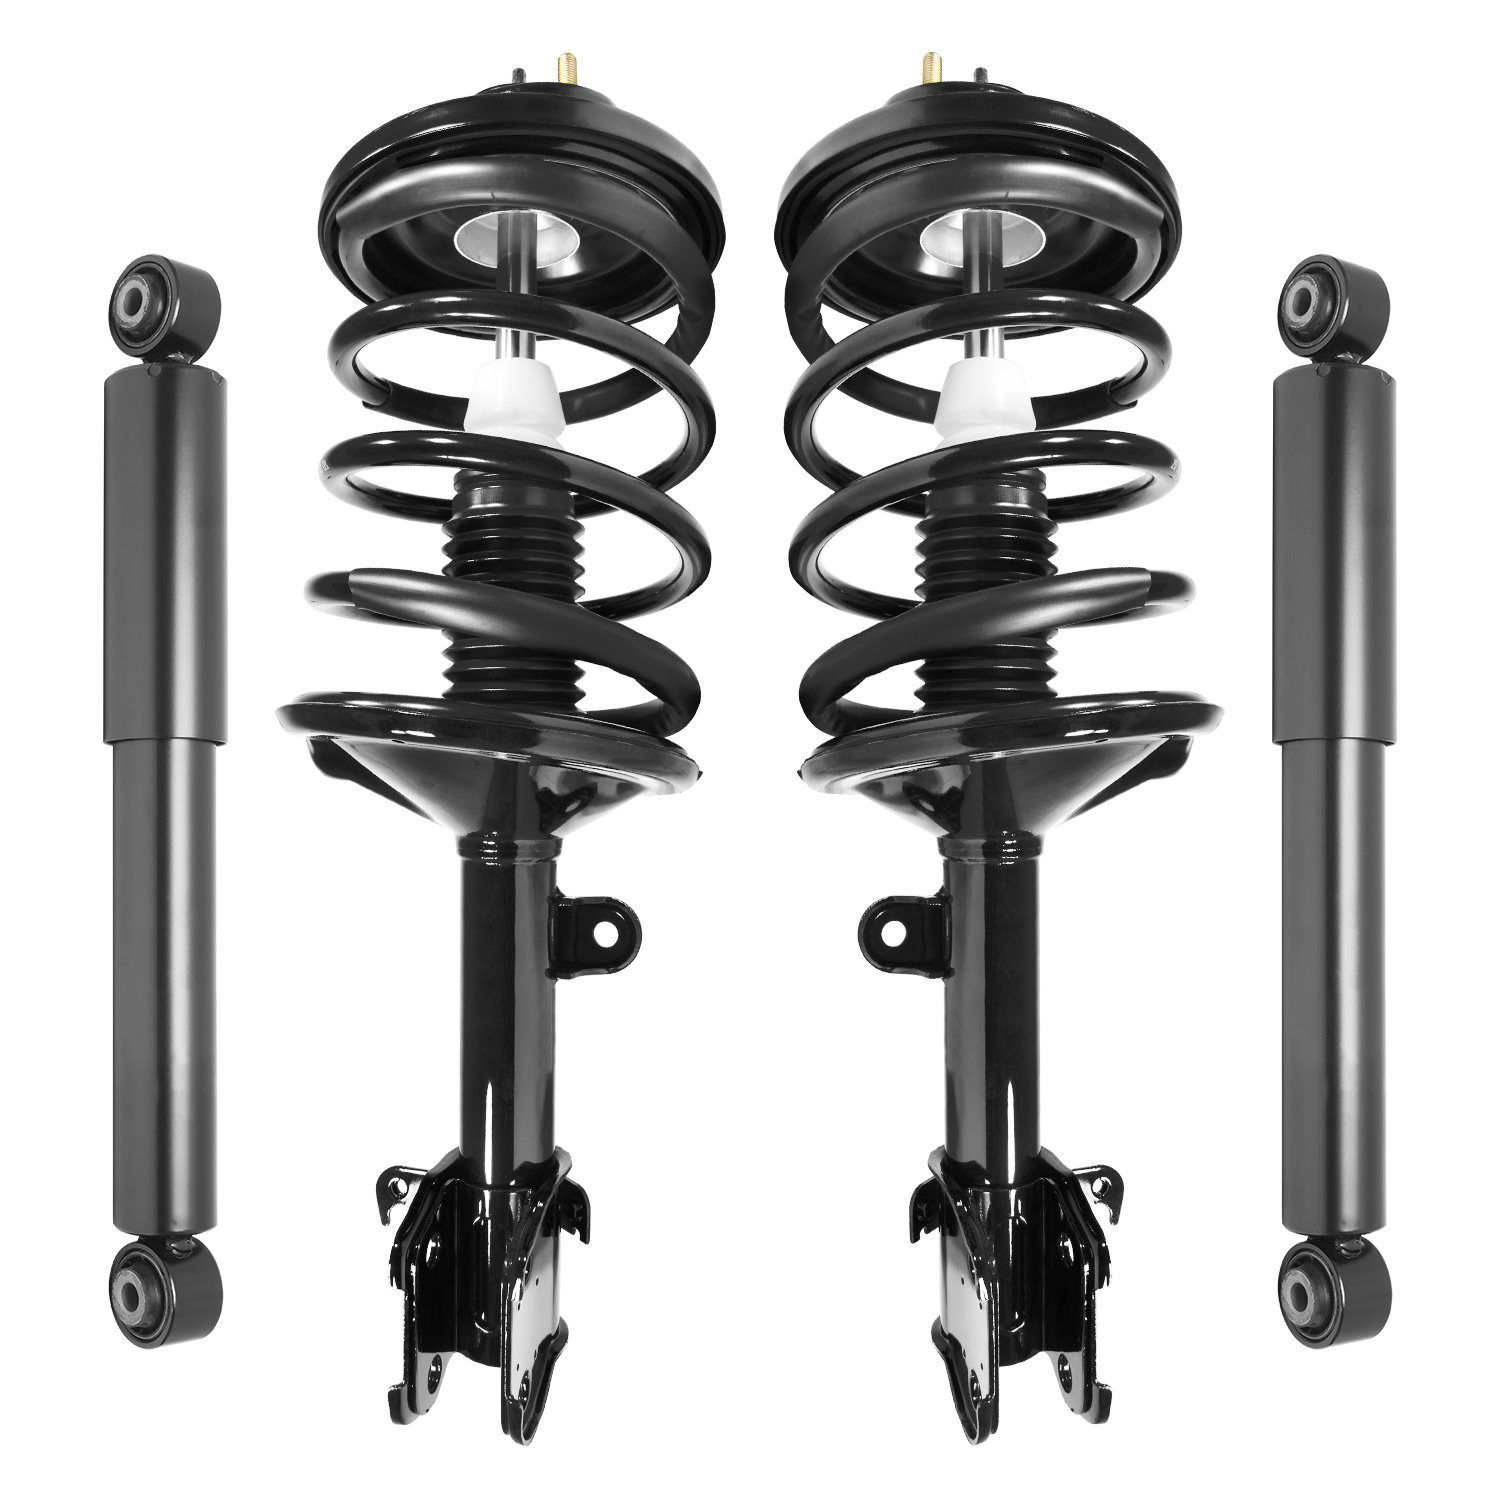 4-11643-250030-001 Front & Rear Suspension Strut & Coil Spring Assembly Fits Select Acura MDX, Honda Pilot